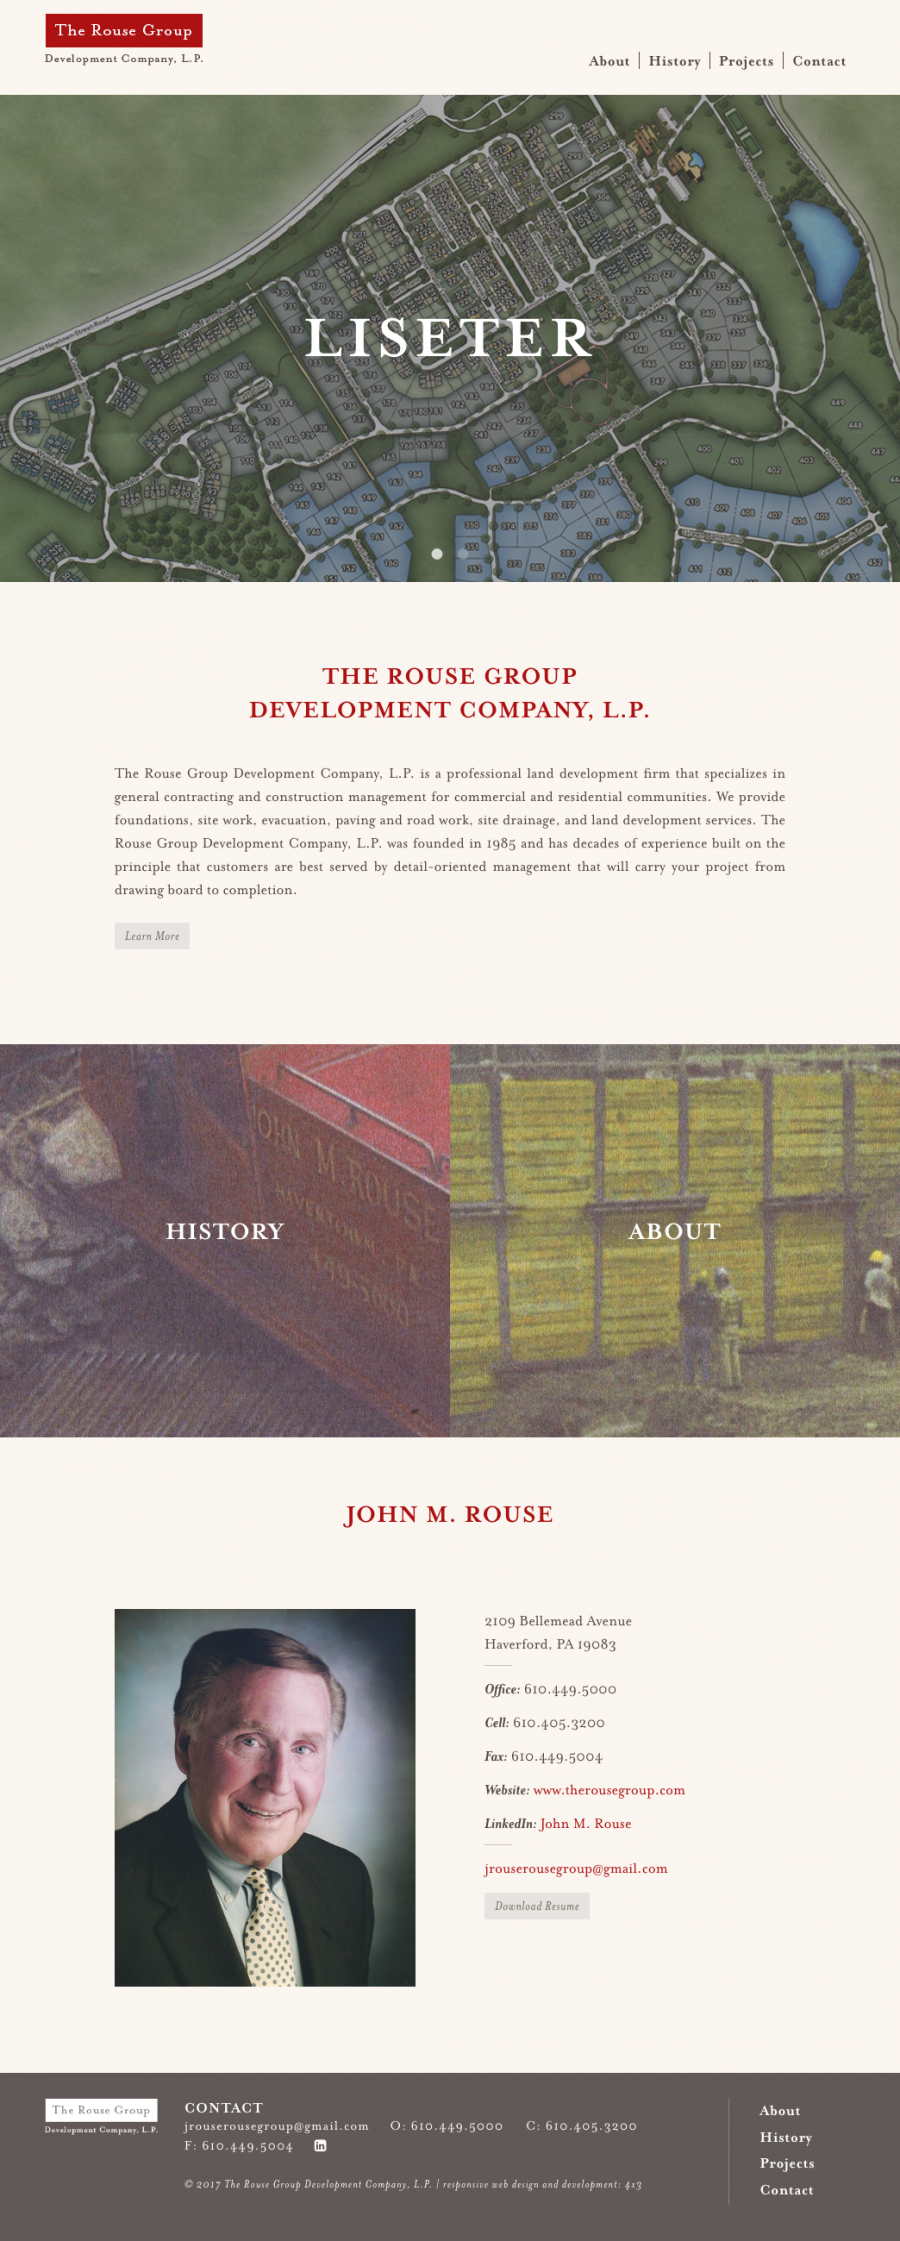 The Rouse Group Homepage, featuring company History and Projects